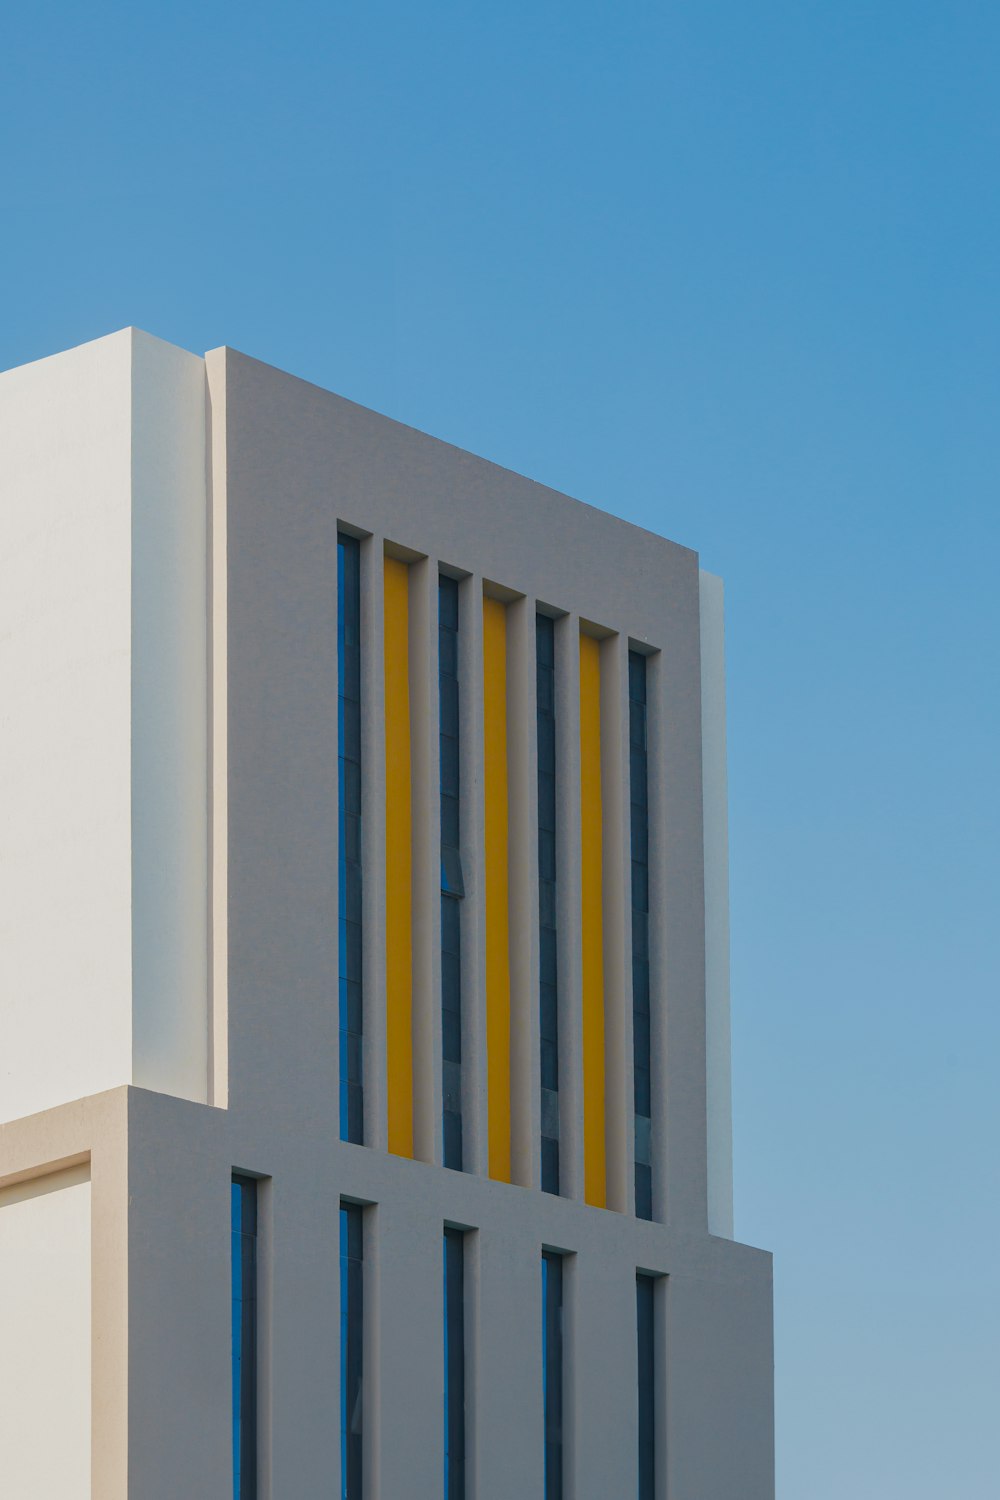 a tall white building with yellow and blue windows